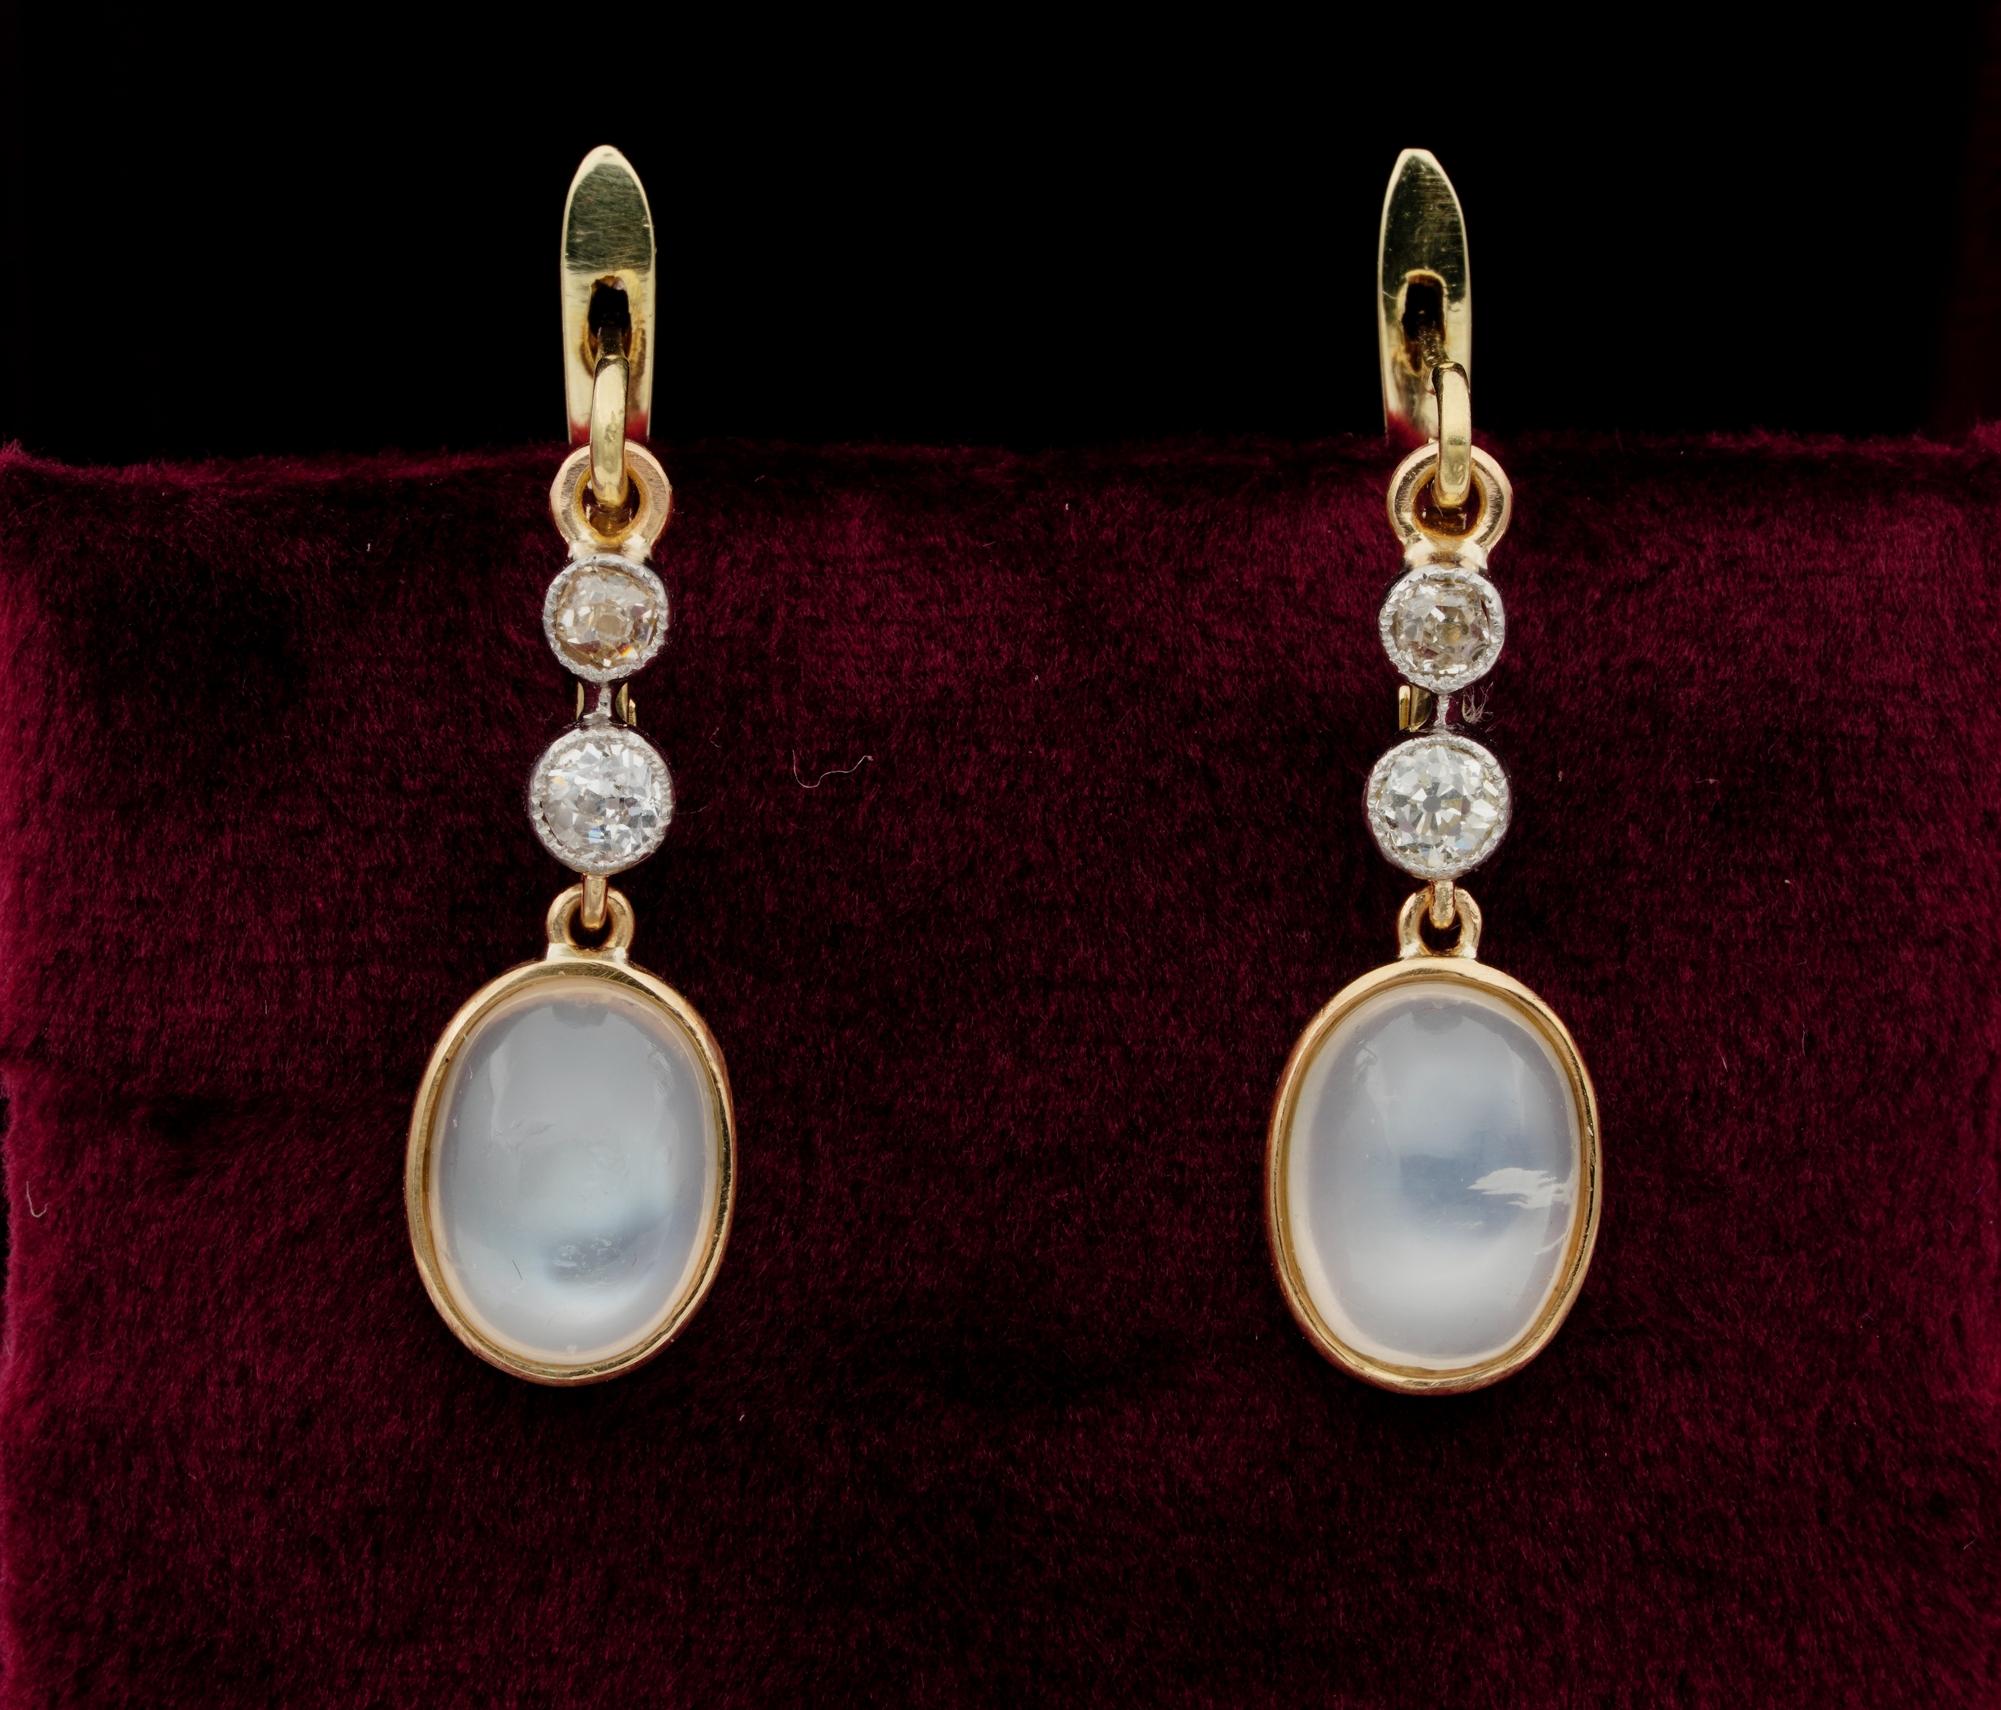 Victorian Delight
These sweet and rare Victorian earrings are 1890/1900 ca
They are beautifully hand crafted of solid 18 KT gold with some Platinum portions
Very pretty, classy Victorian design with two graduated Diamonds at the top side leading to